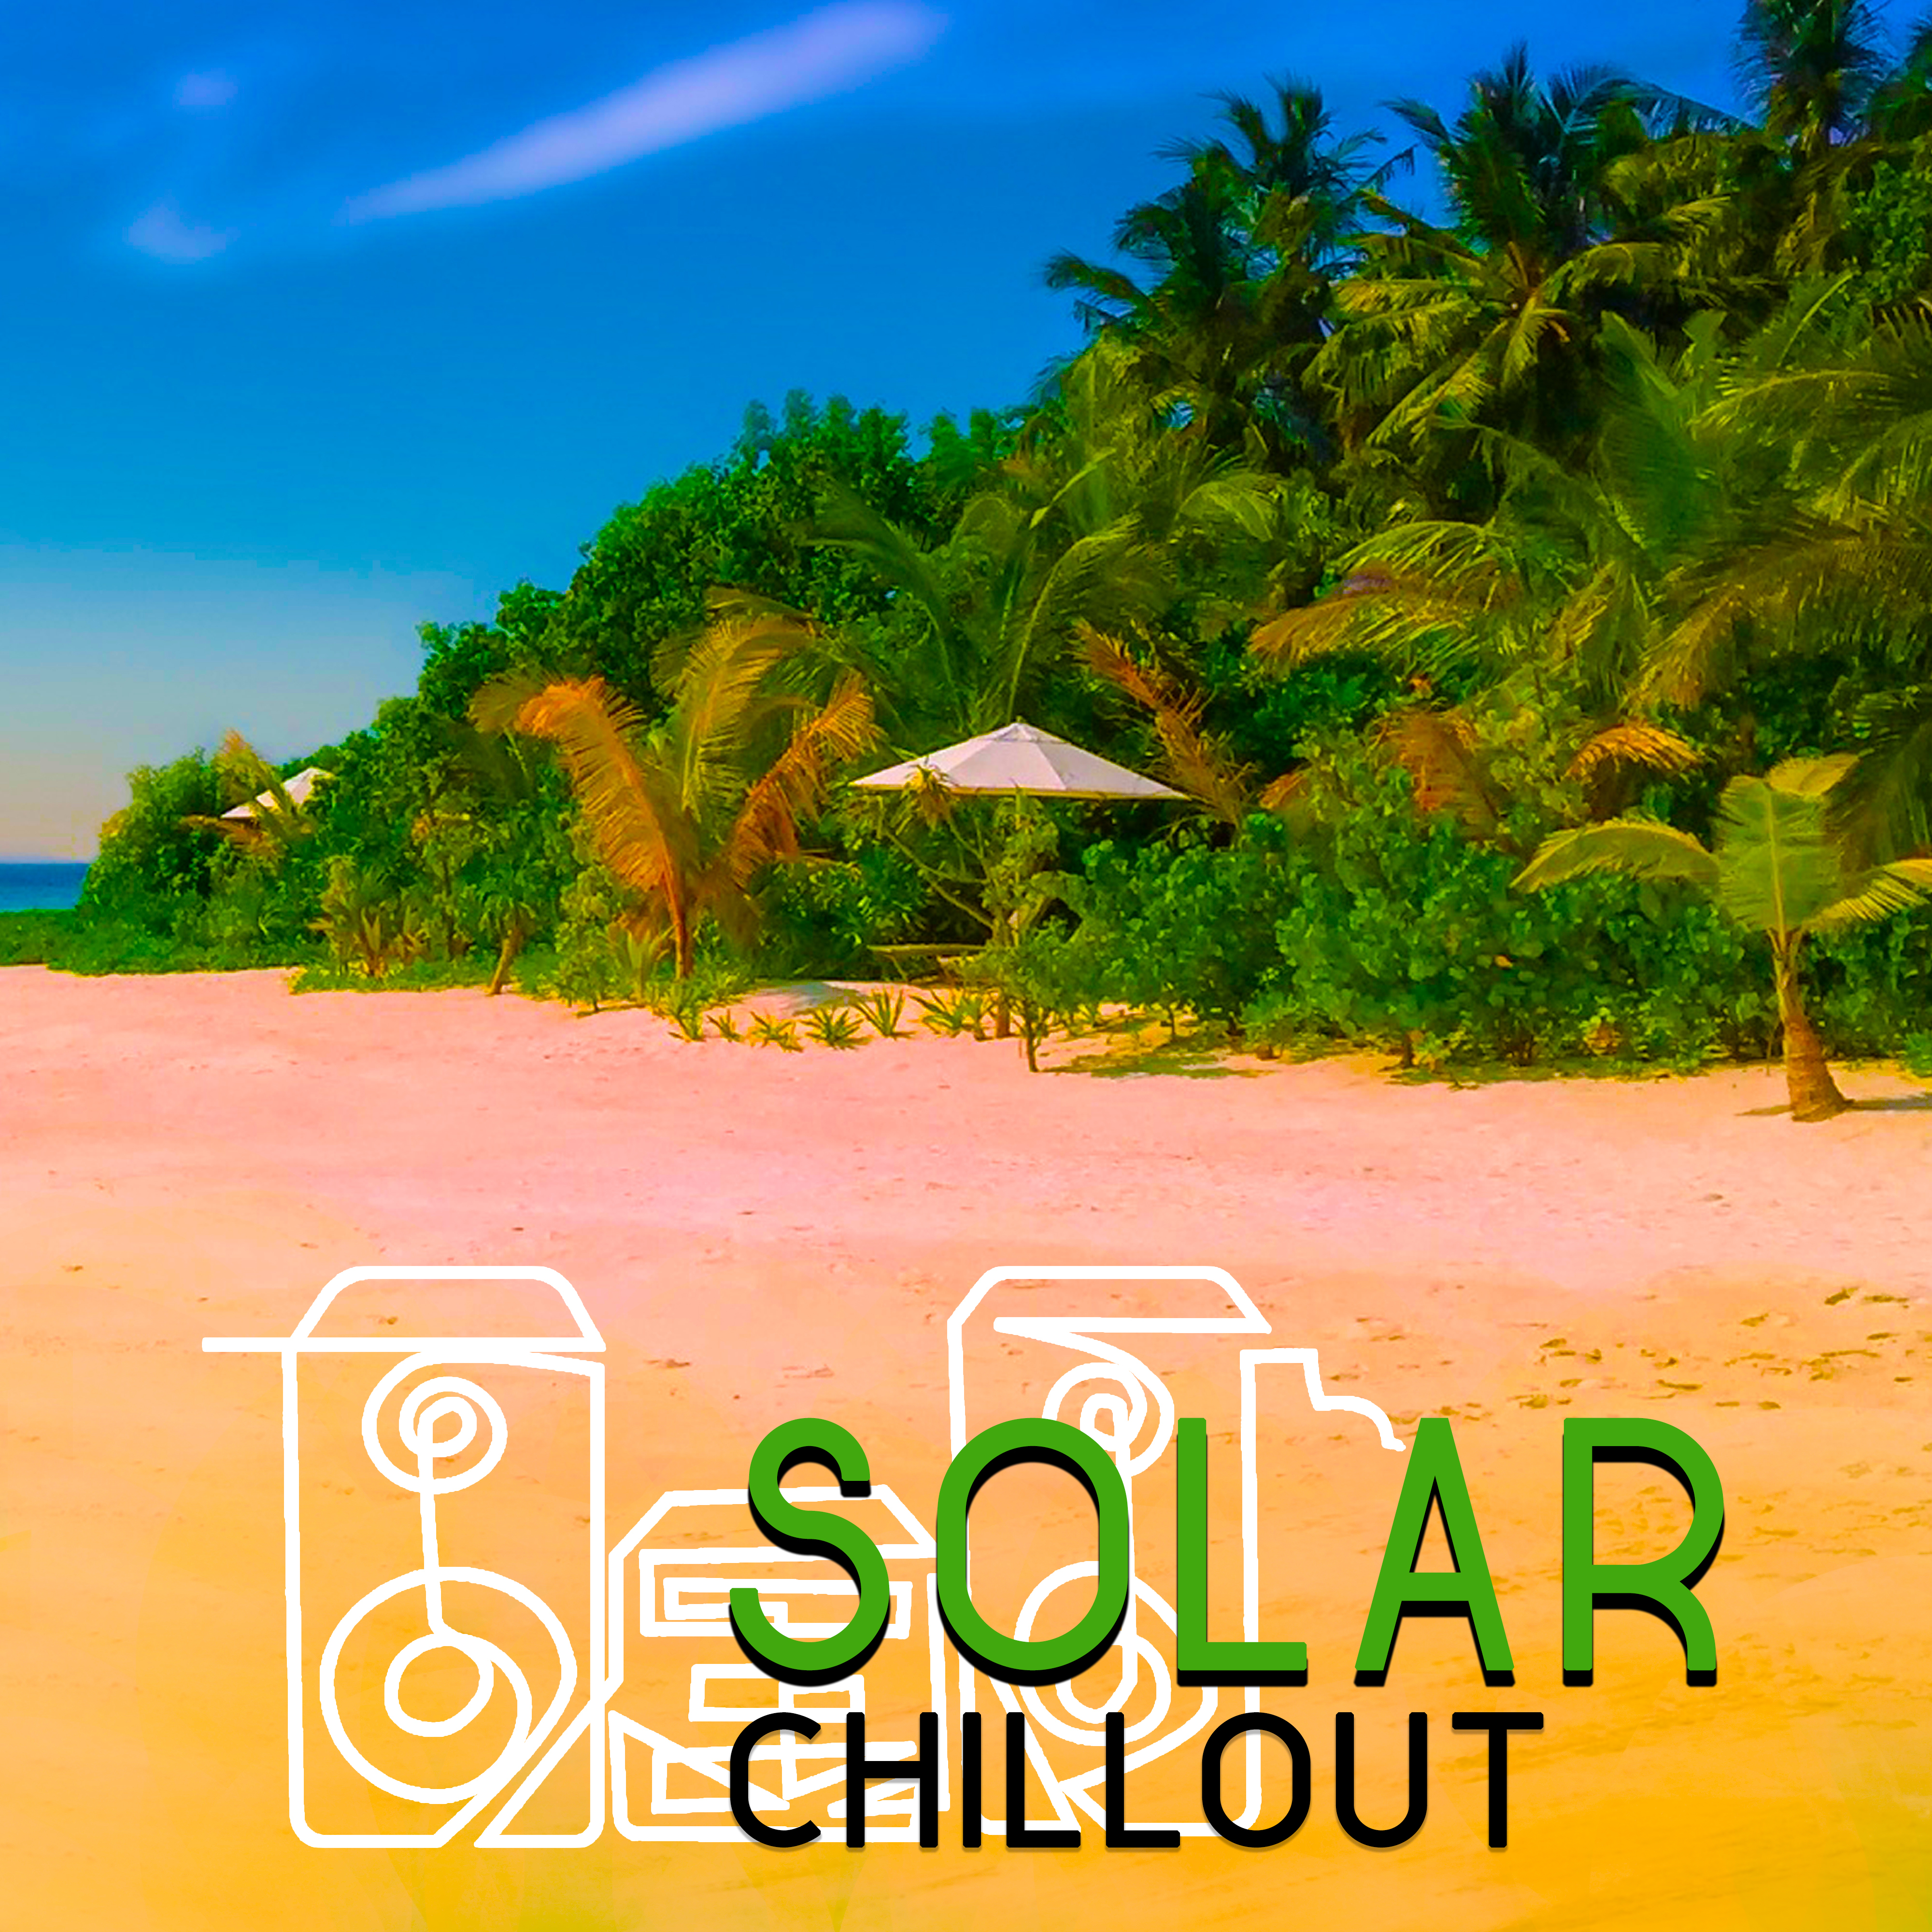 Solar Chillout – Best Holiday Music, Beach Chill, Sexy Beats, Ibiza Party, Dance Music, Summertime